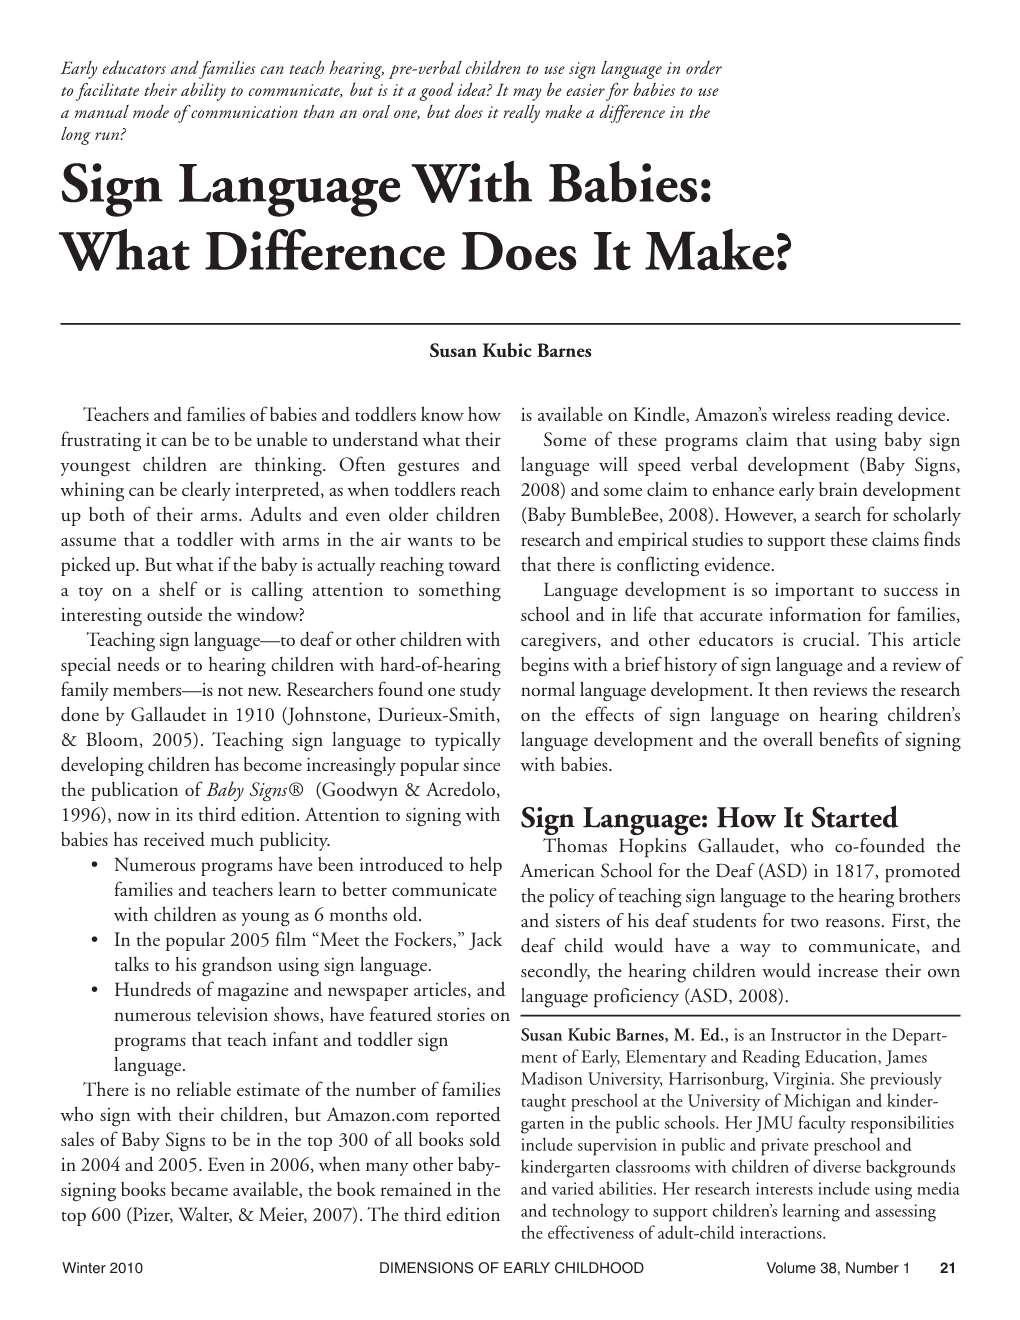 Sign Language with Babies: What Difference Does It Make?